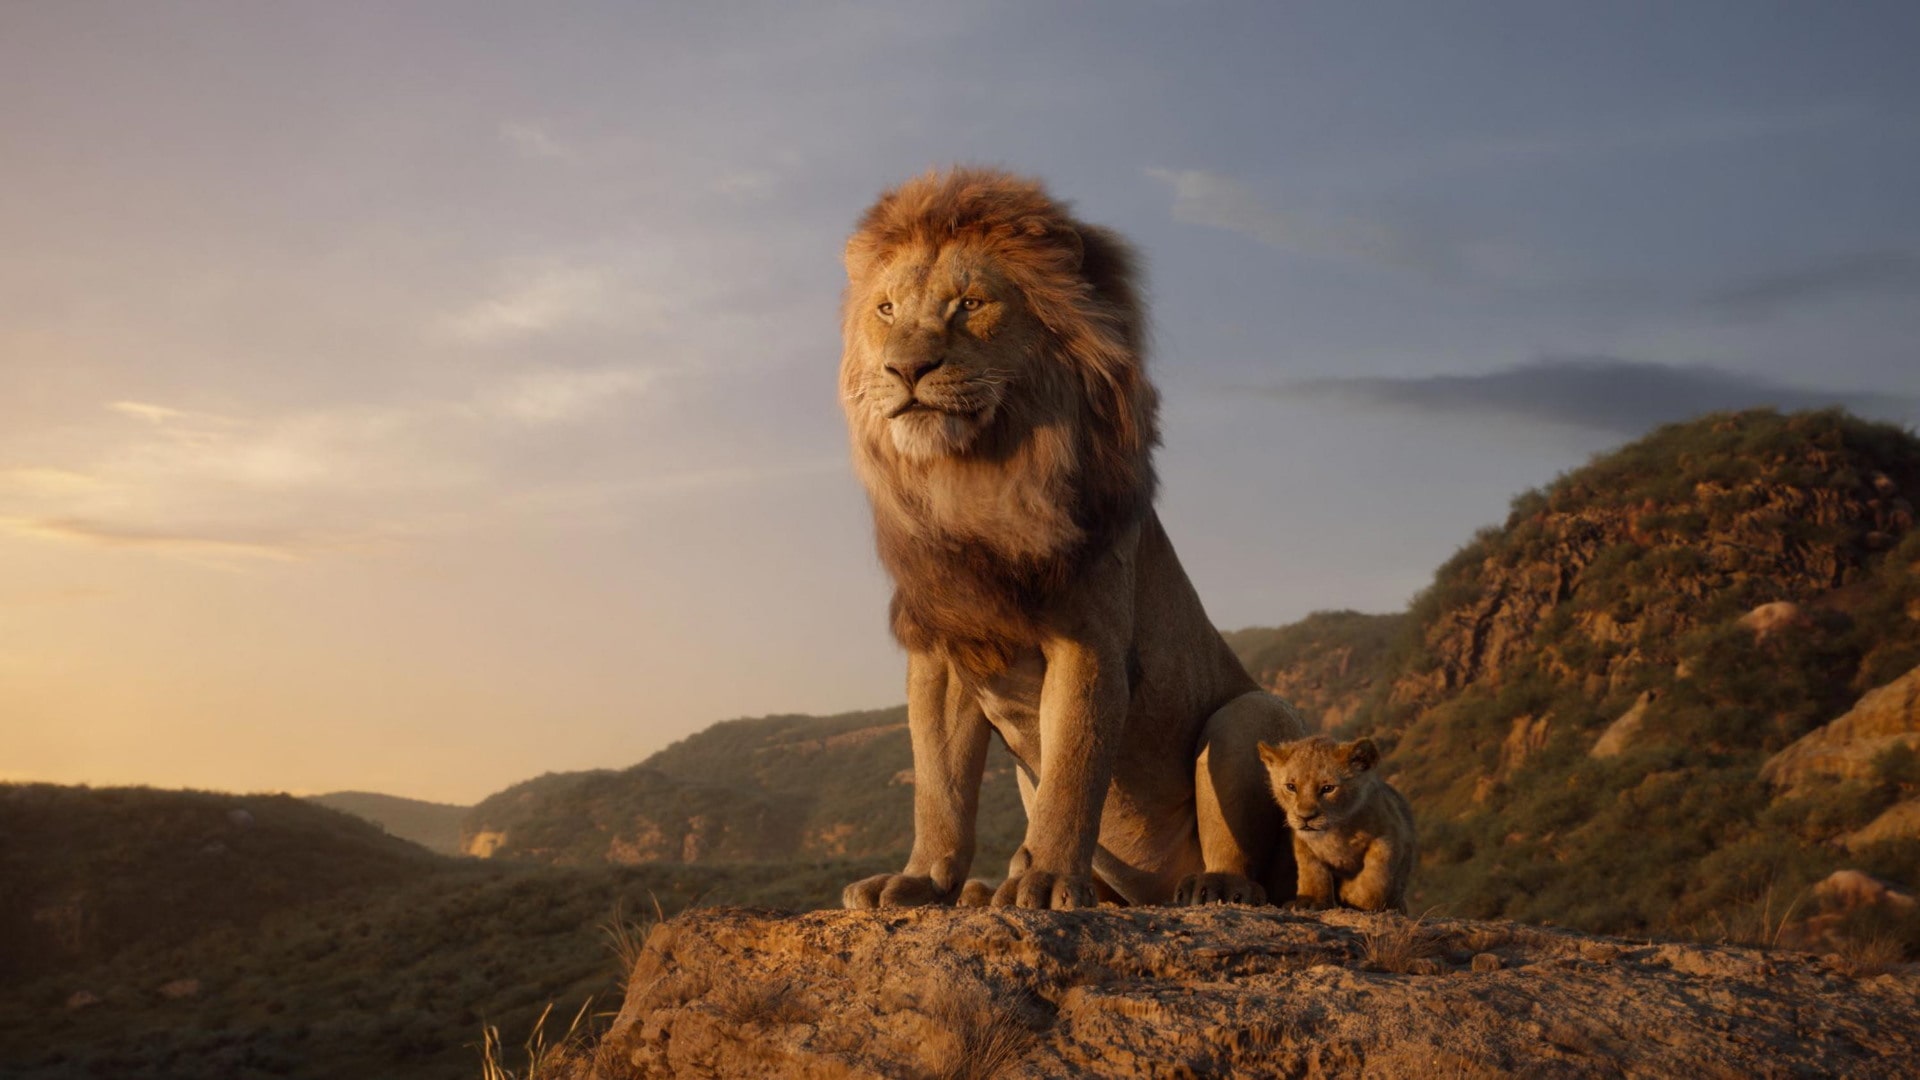 watch the lion king free online full movie